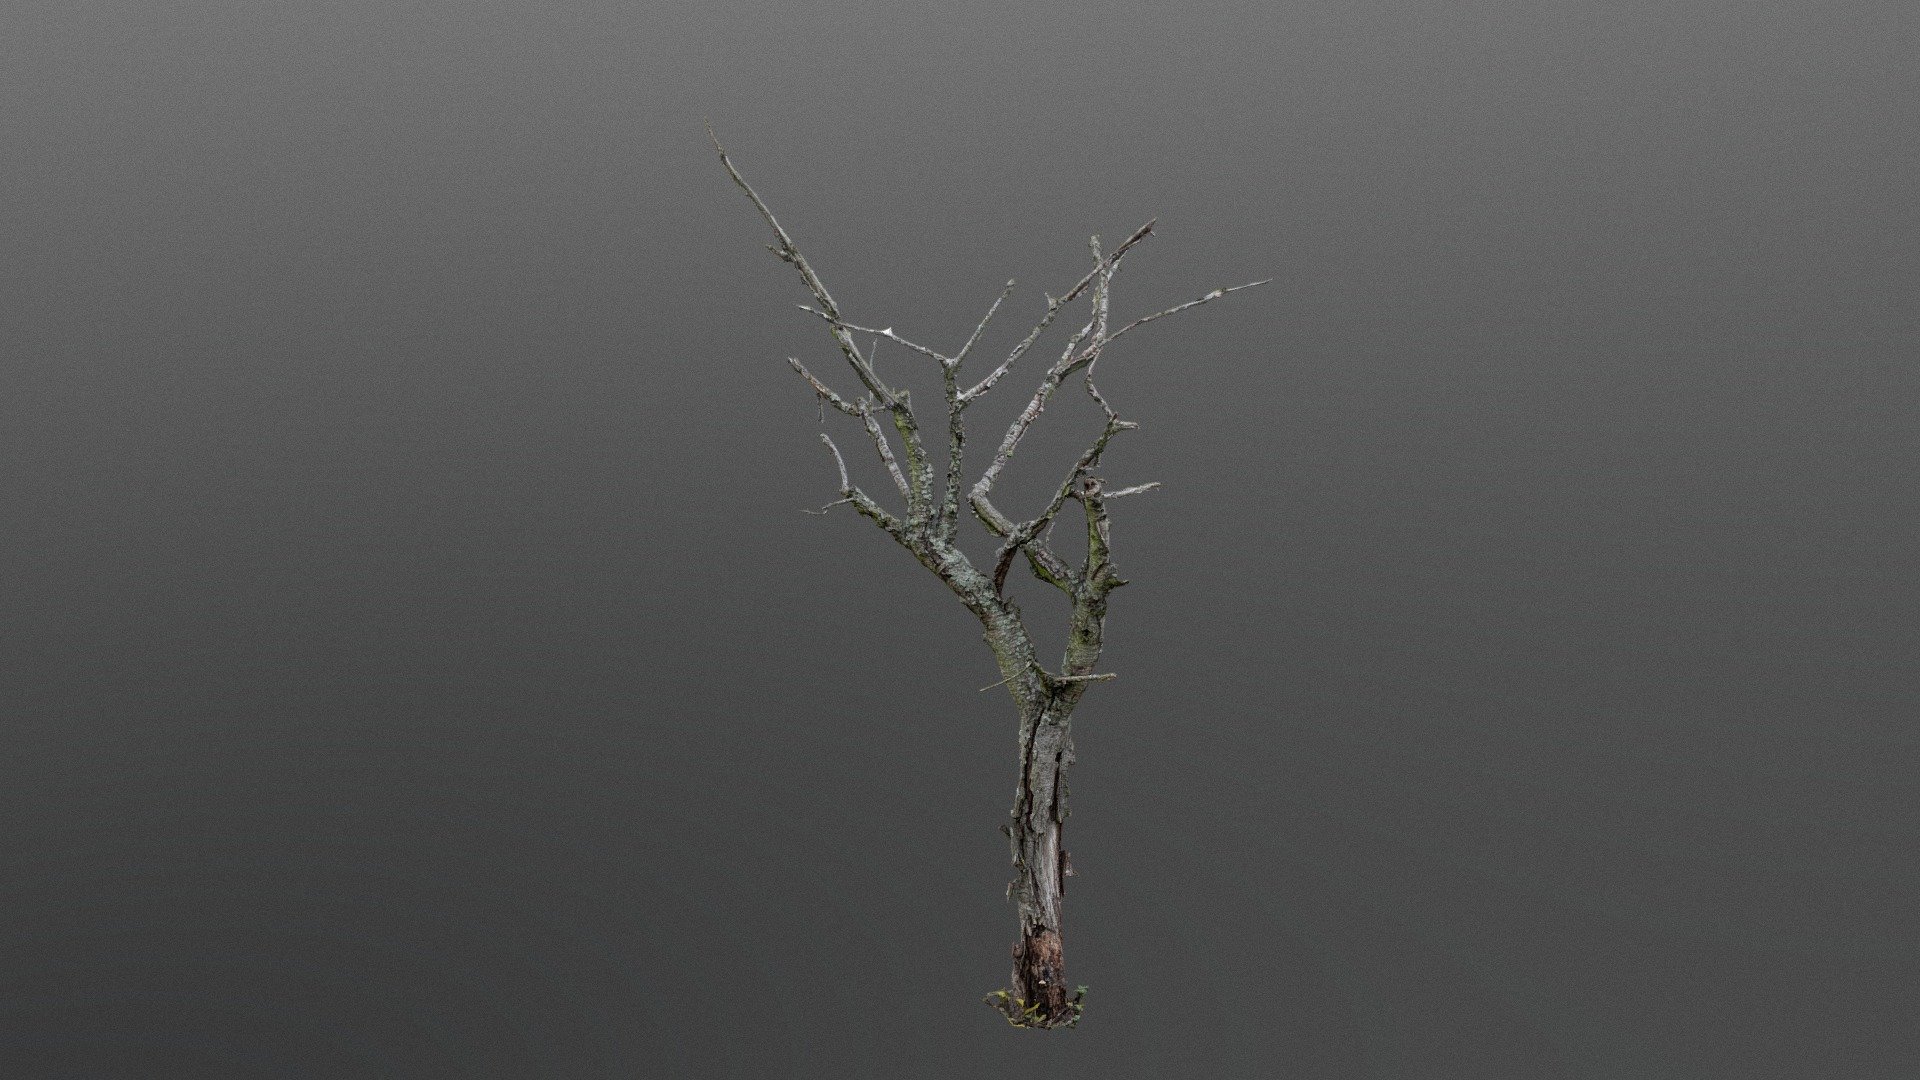 Photogrammetry from 291 photos, 8,9MP - Reality capture

Canon 6D mkII + Dji phantom 4 - The Old Dead Tree - Buy Royalty Free 3D model by kubacpetr 3d model